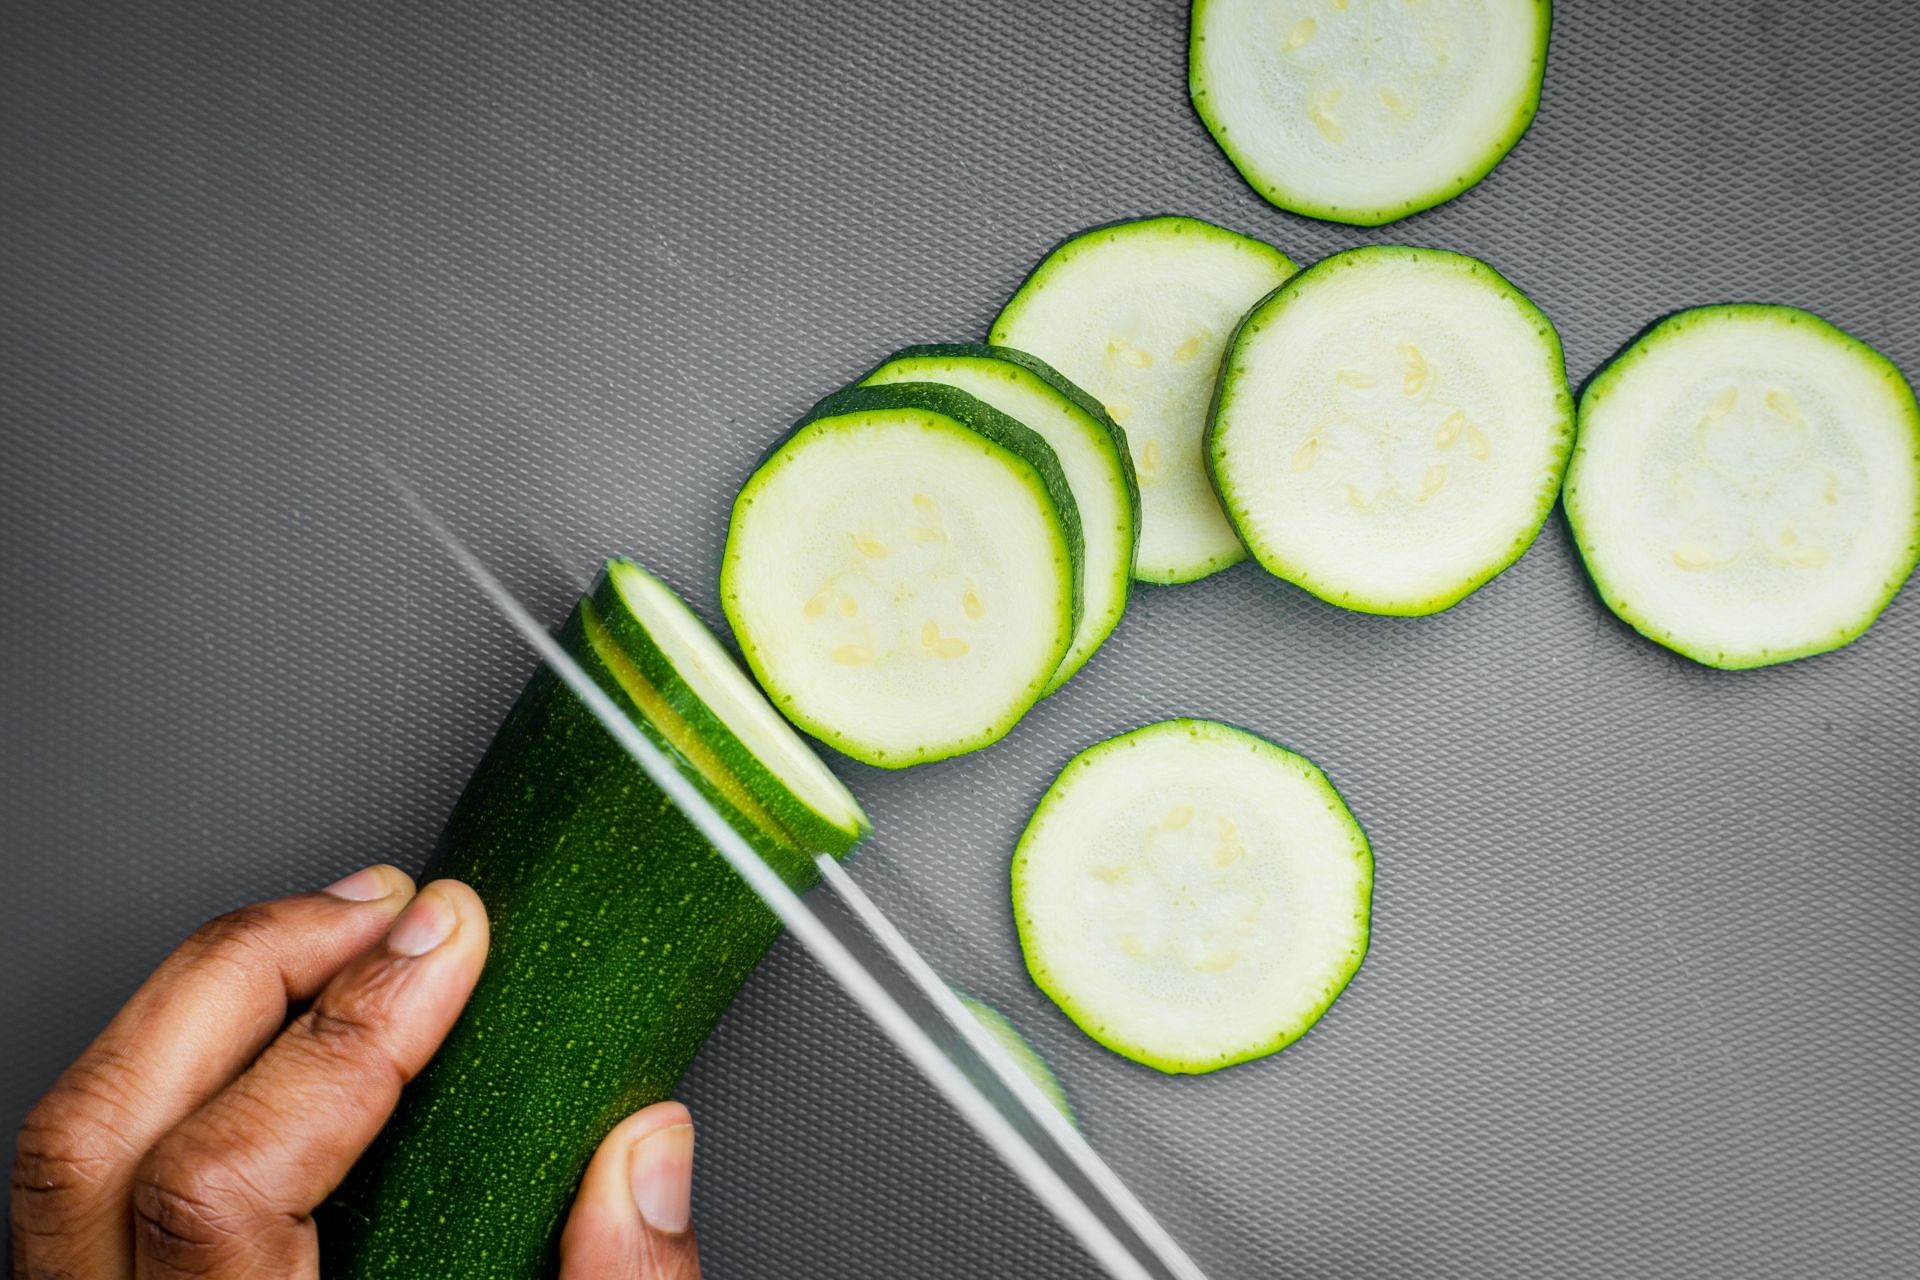 Zucchini is beneficial for weight loss. (Image via Unsplash/Louis Hansel)